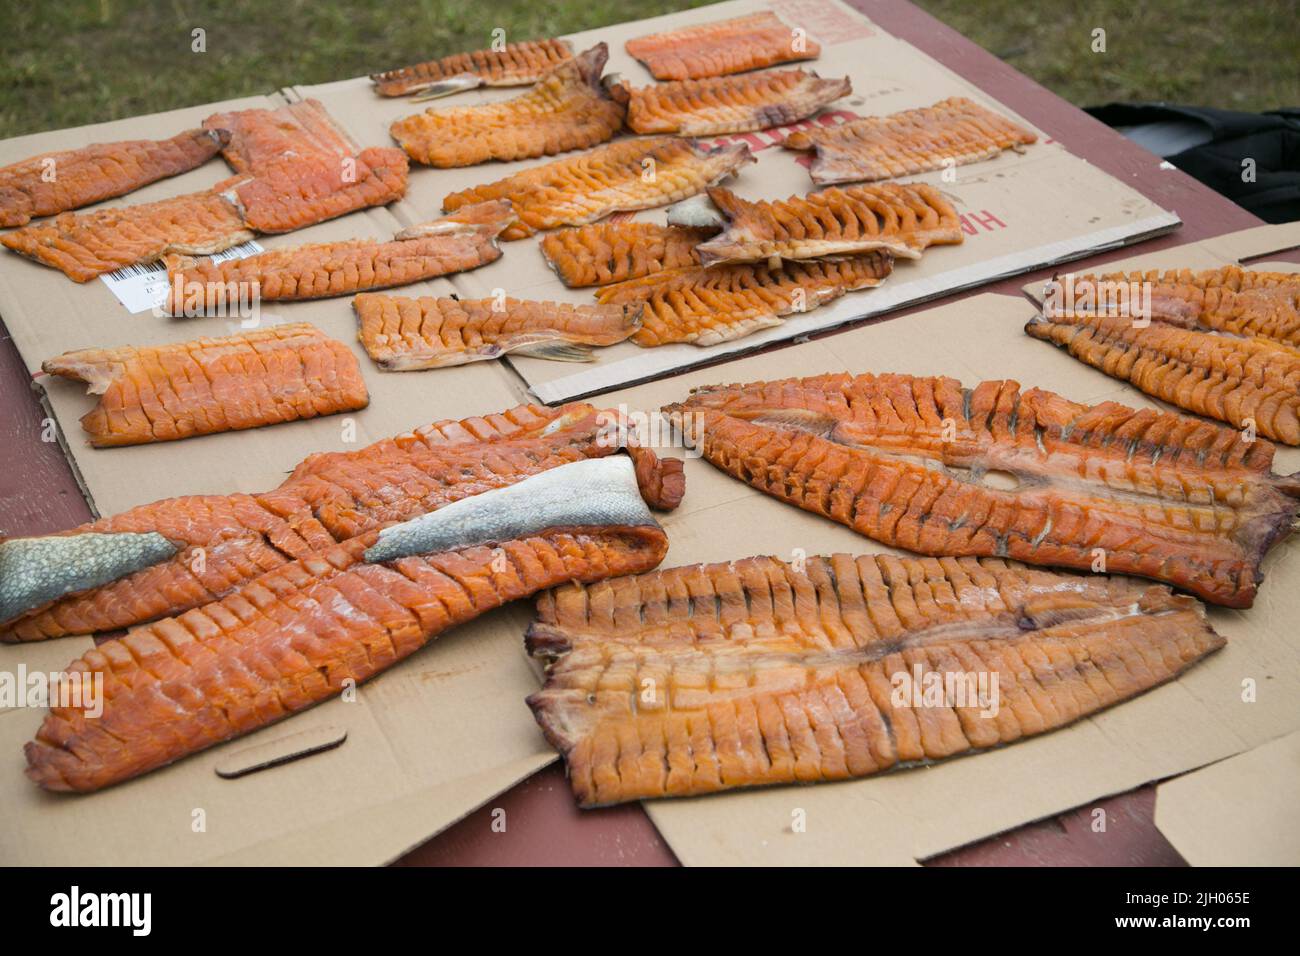 Fish (Lake Trout) fillets prepared for smoking, in the northern Indigenous community of Deline, Northwest Territories, Canada. Stock Photo